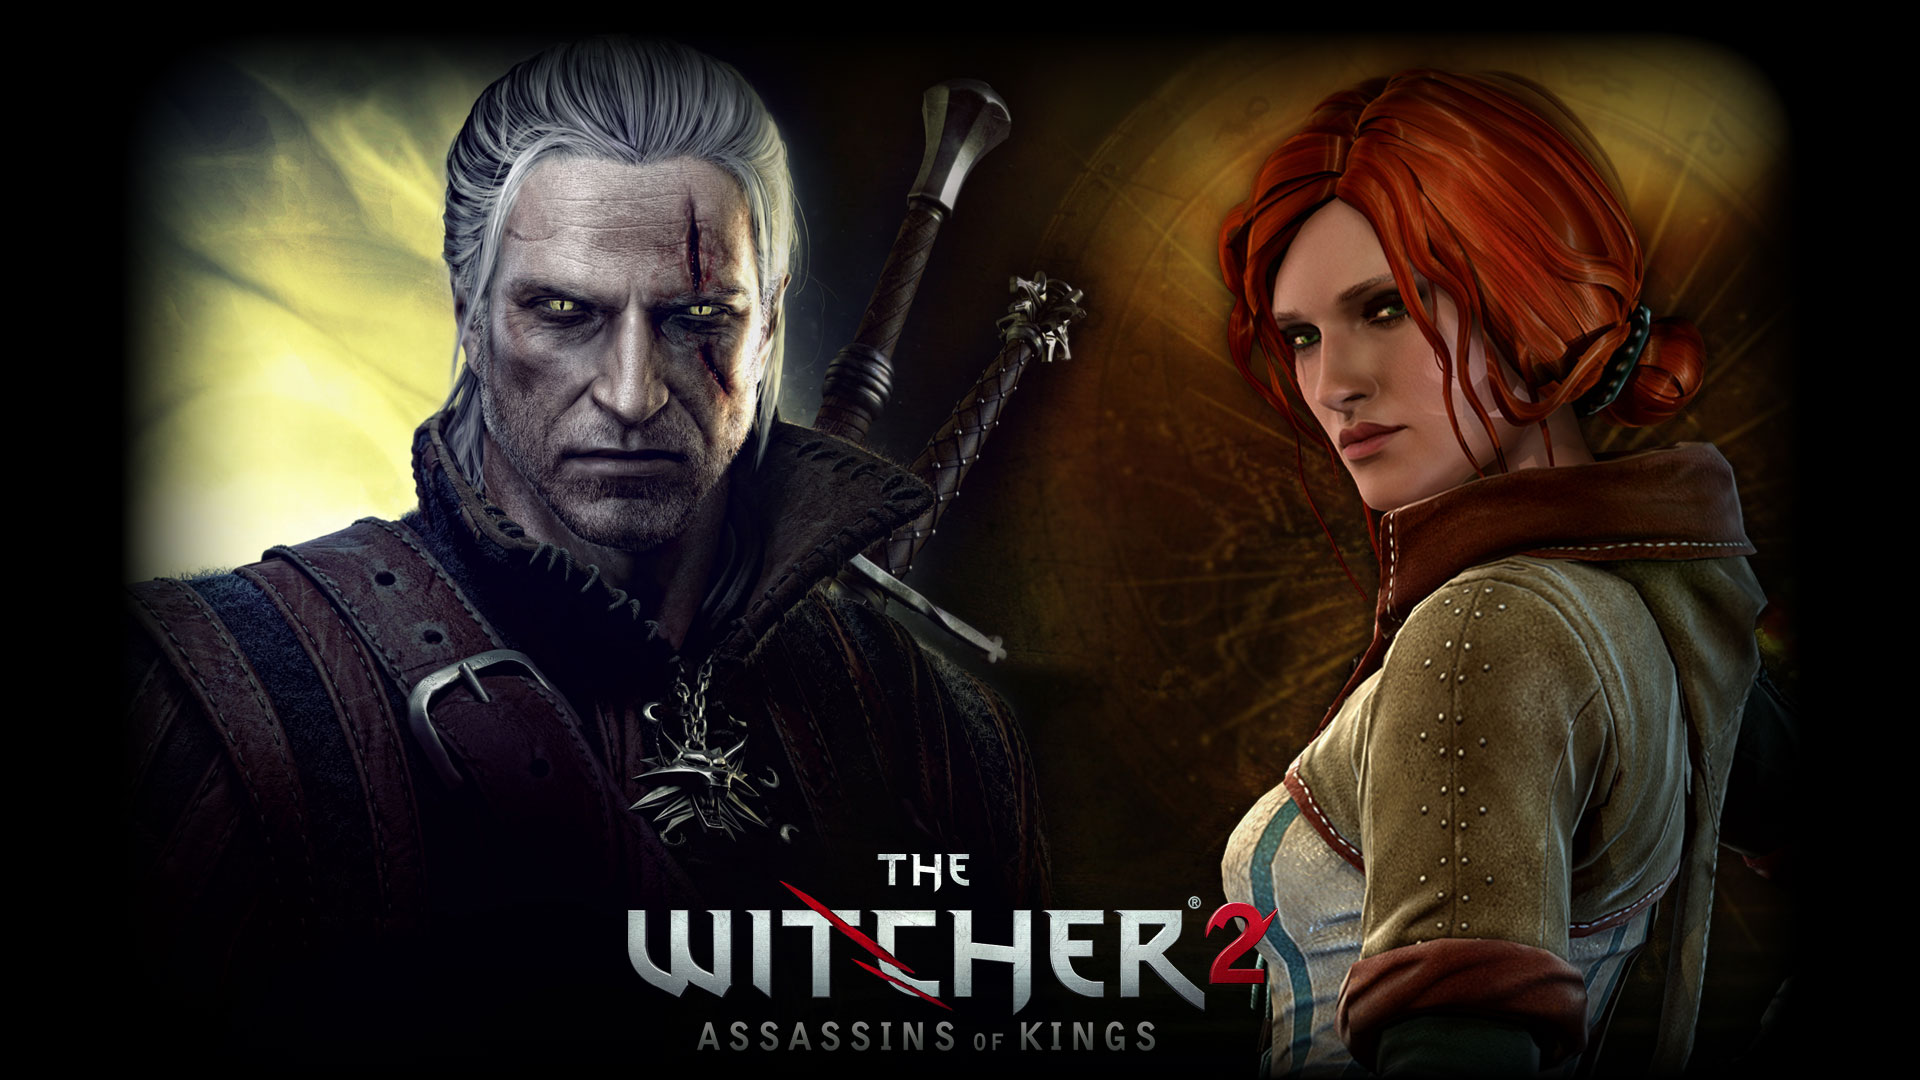 The Witcher 2: Assassins of Kings Free With Games With Gold Now (If You Can  Access It)